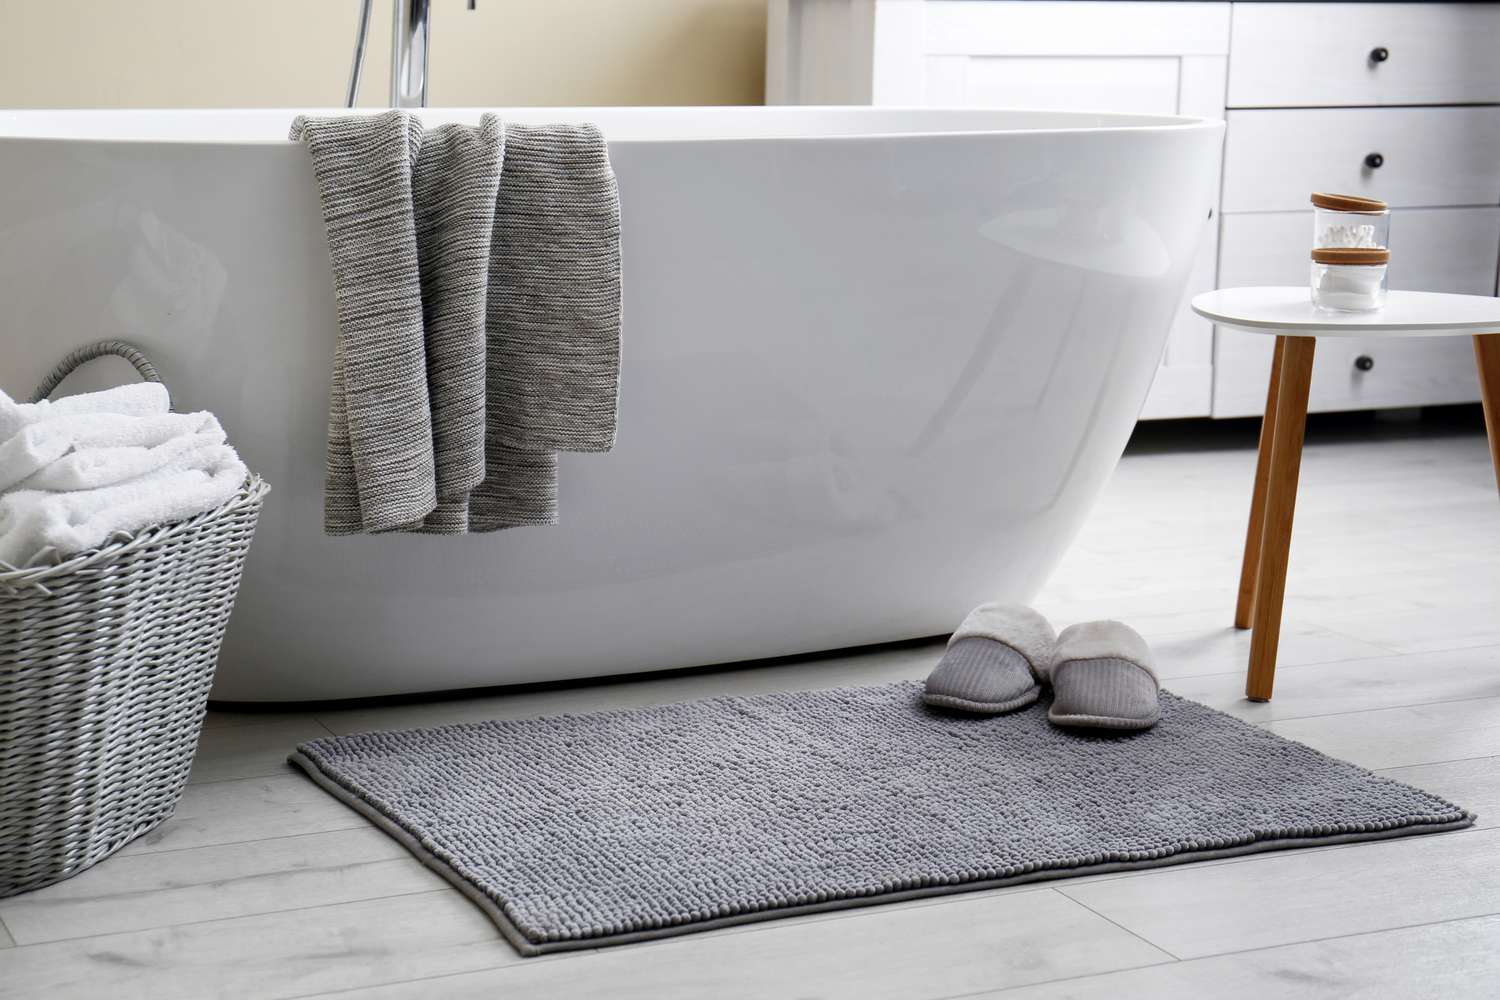 how-to-wash-a-bath-matt-GettyImages-1412416599-4a451b7894784be0bbbc438018d41f7f